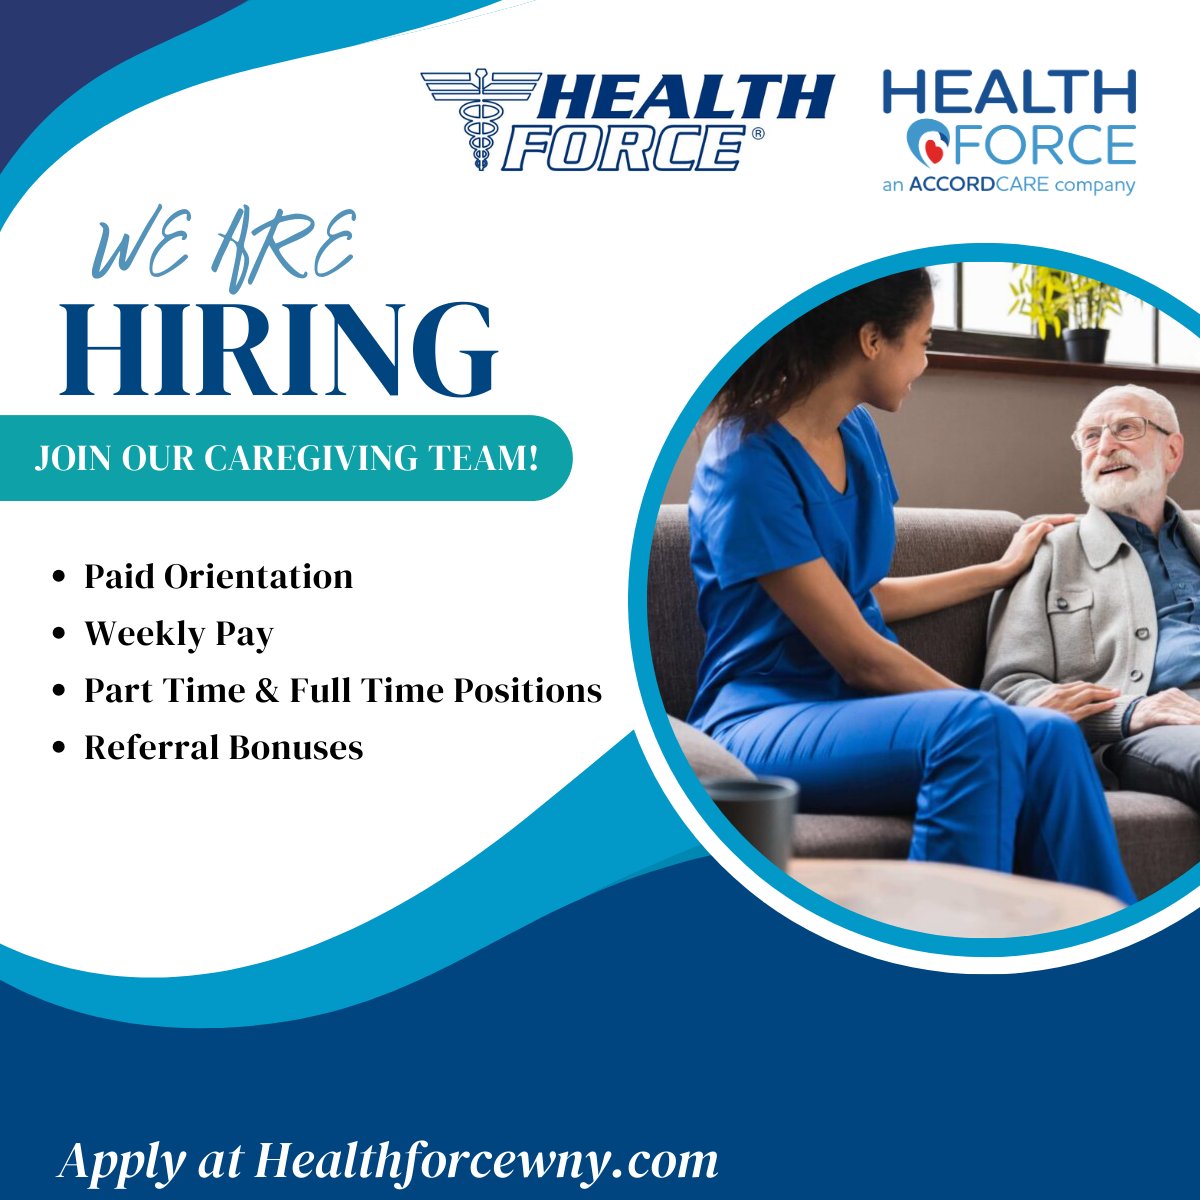 Apply now at lnkd.in/enbTn4vr and be part of our mission to bring compassionate care to Western New York! #CaregiverJobs #NiagaraJobs #JoinOurTeam #HiringCaregivers #HomeCare #BuffaloCaregivers #NewYorkNurseJobs #HomeCare #BuffaloCaregivers #NewYorkNurseJobs